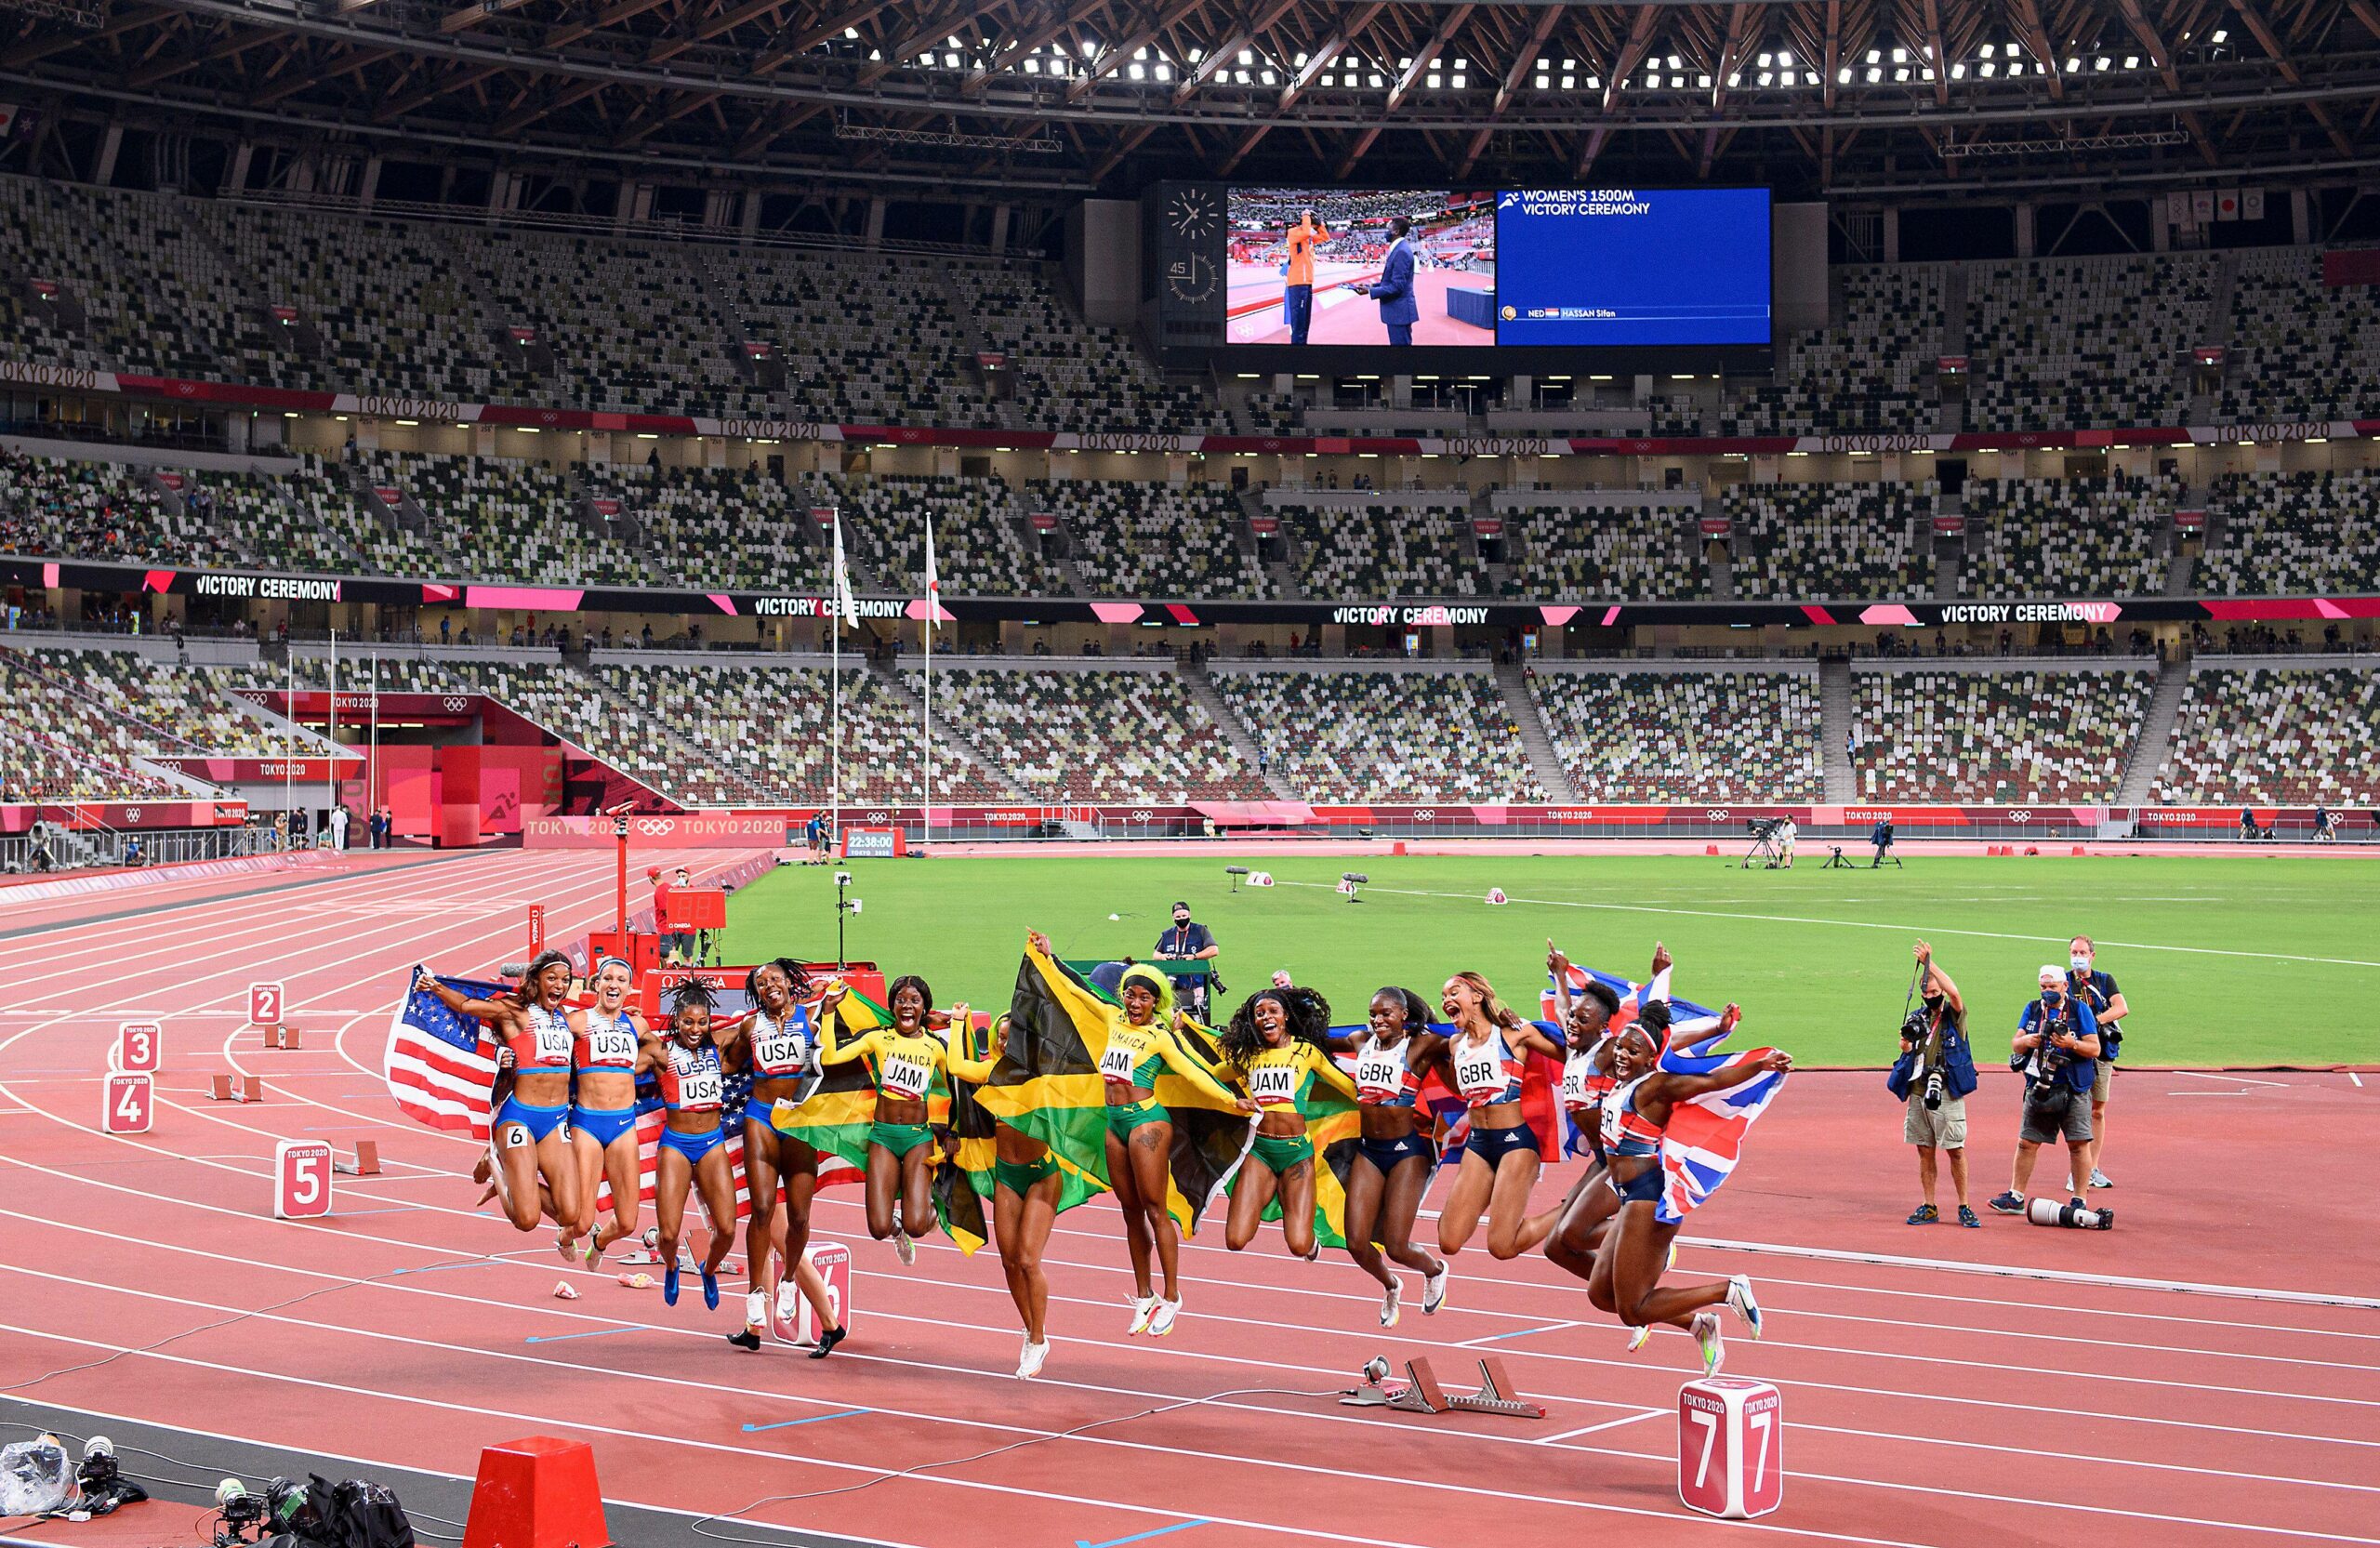 Guide To Watching And Streaming The World Athletics Championships: Competitors, Schedule, And Viewing Options